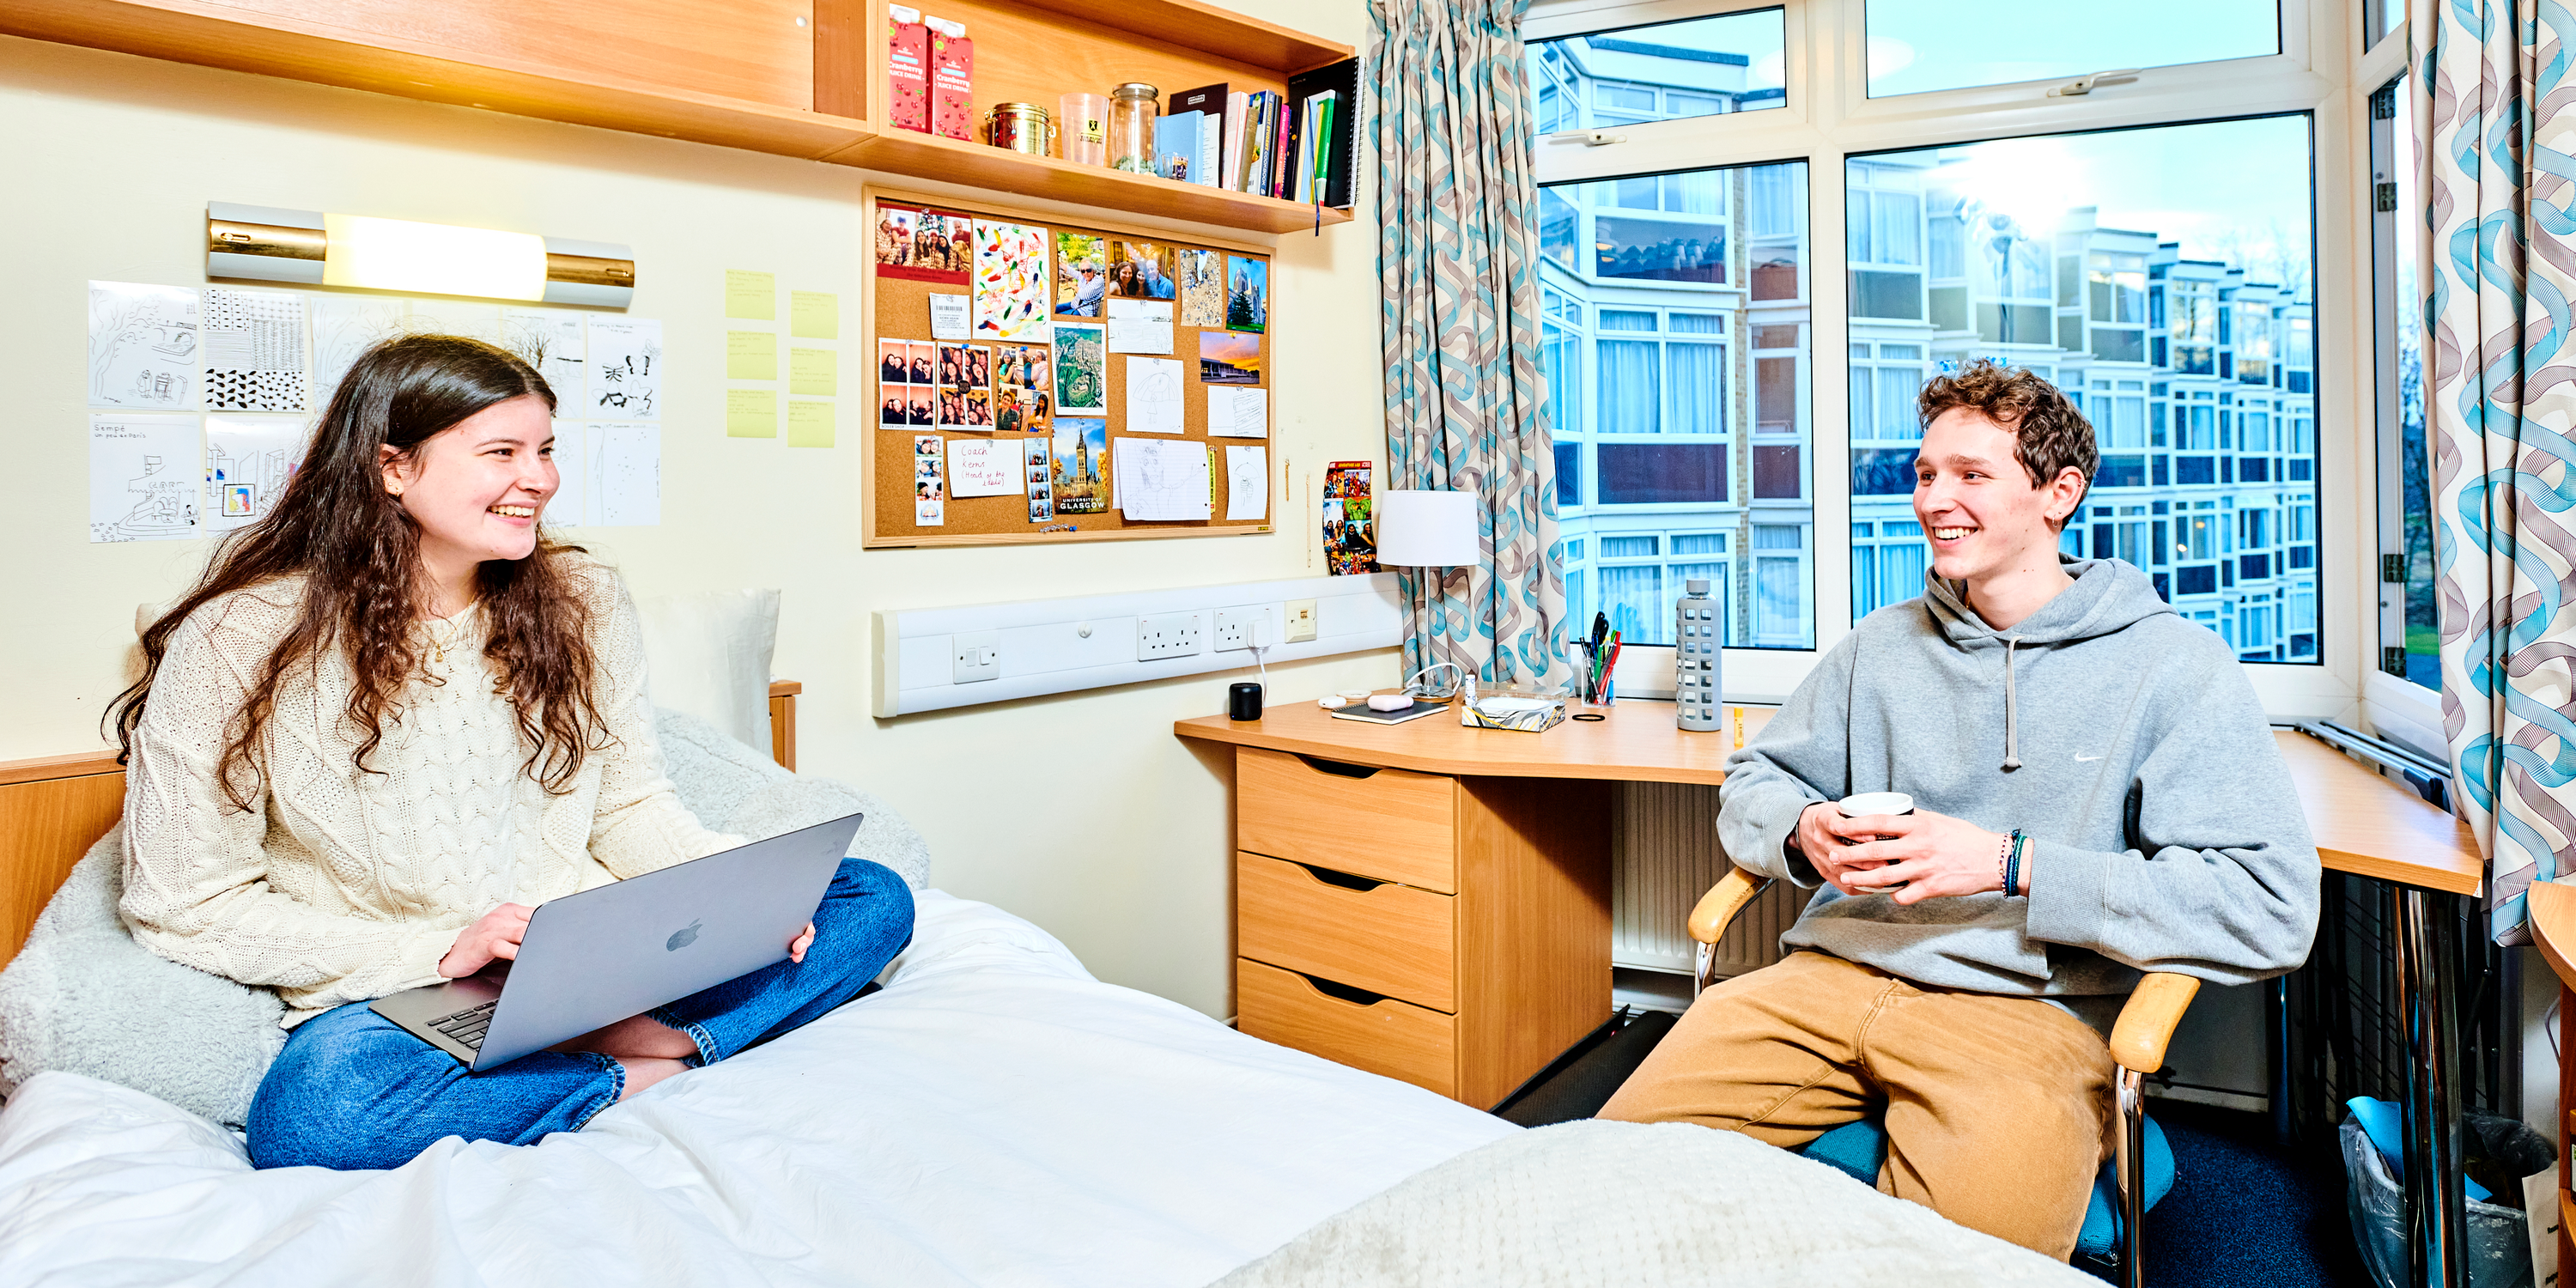 Two students sit in a typical college bedroom. She sits crosslegged on her bed, holding a laptop. He sits on a chair next to the bed and they are talking and laughing